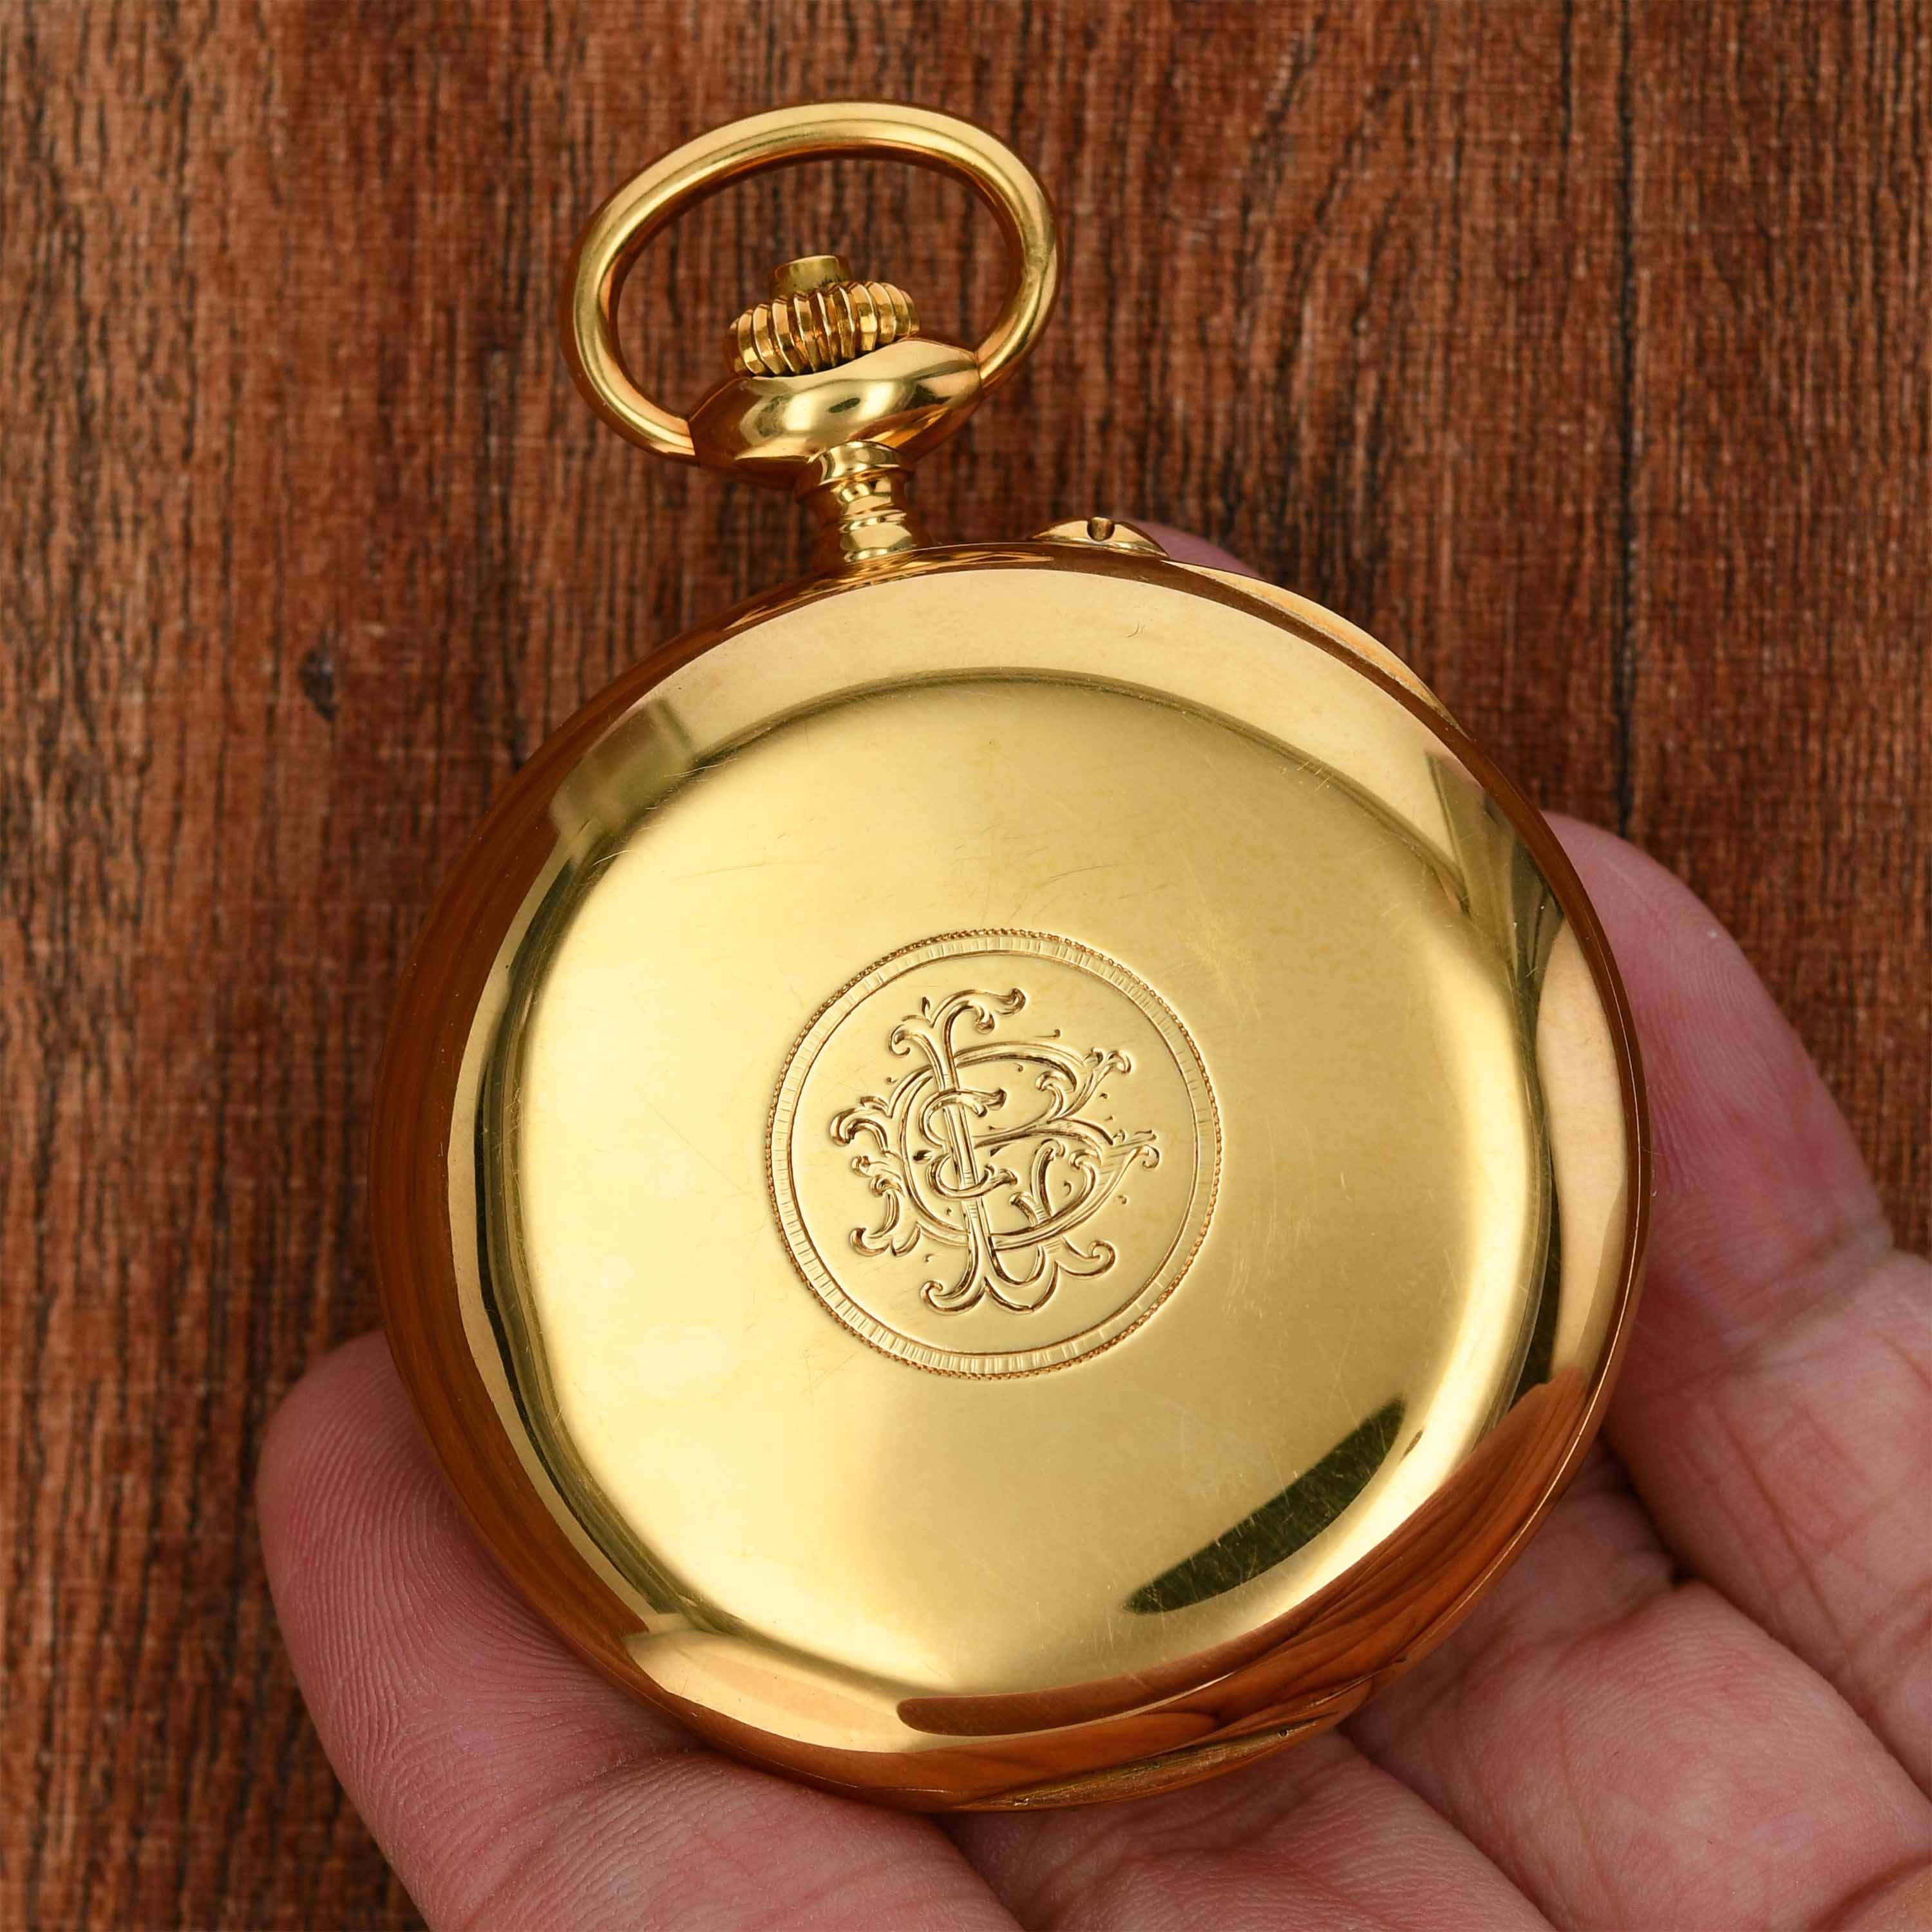 Vacheron Constantin Doctor’s pocket watch, chronograph, pulsometer scale, enamel dial in yellow gold img main4